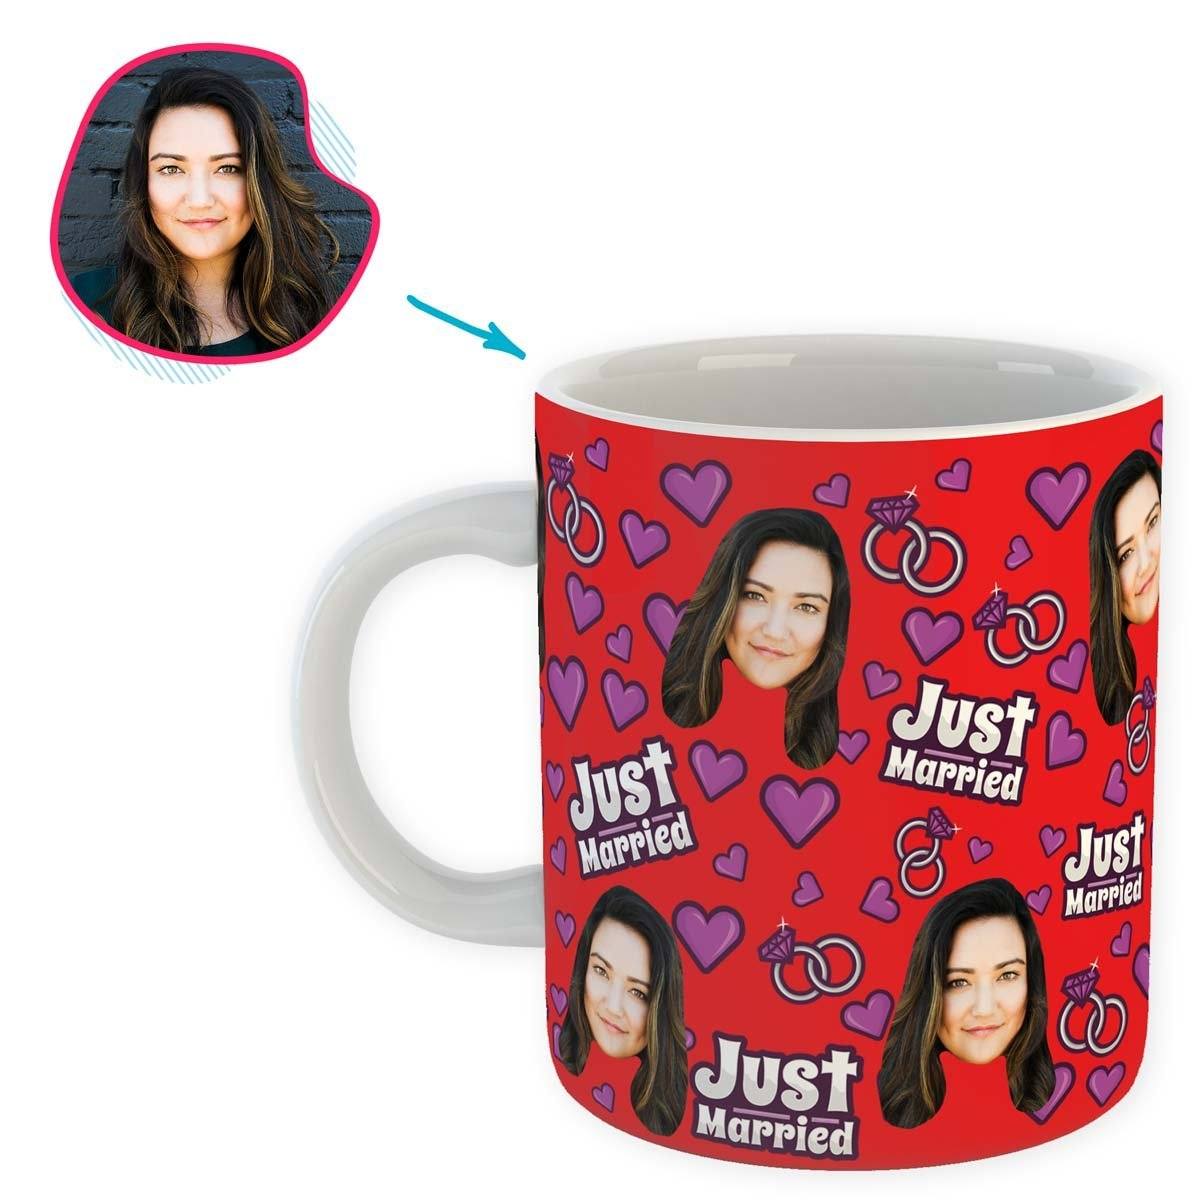 red Just Married mug personalized with photo of face printed on it